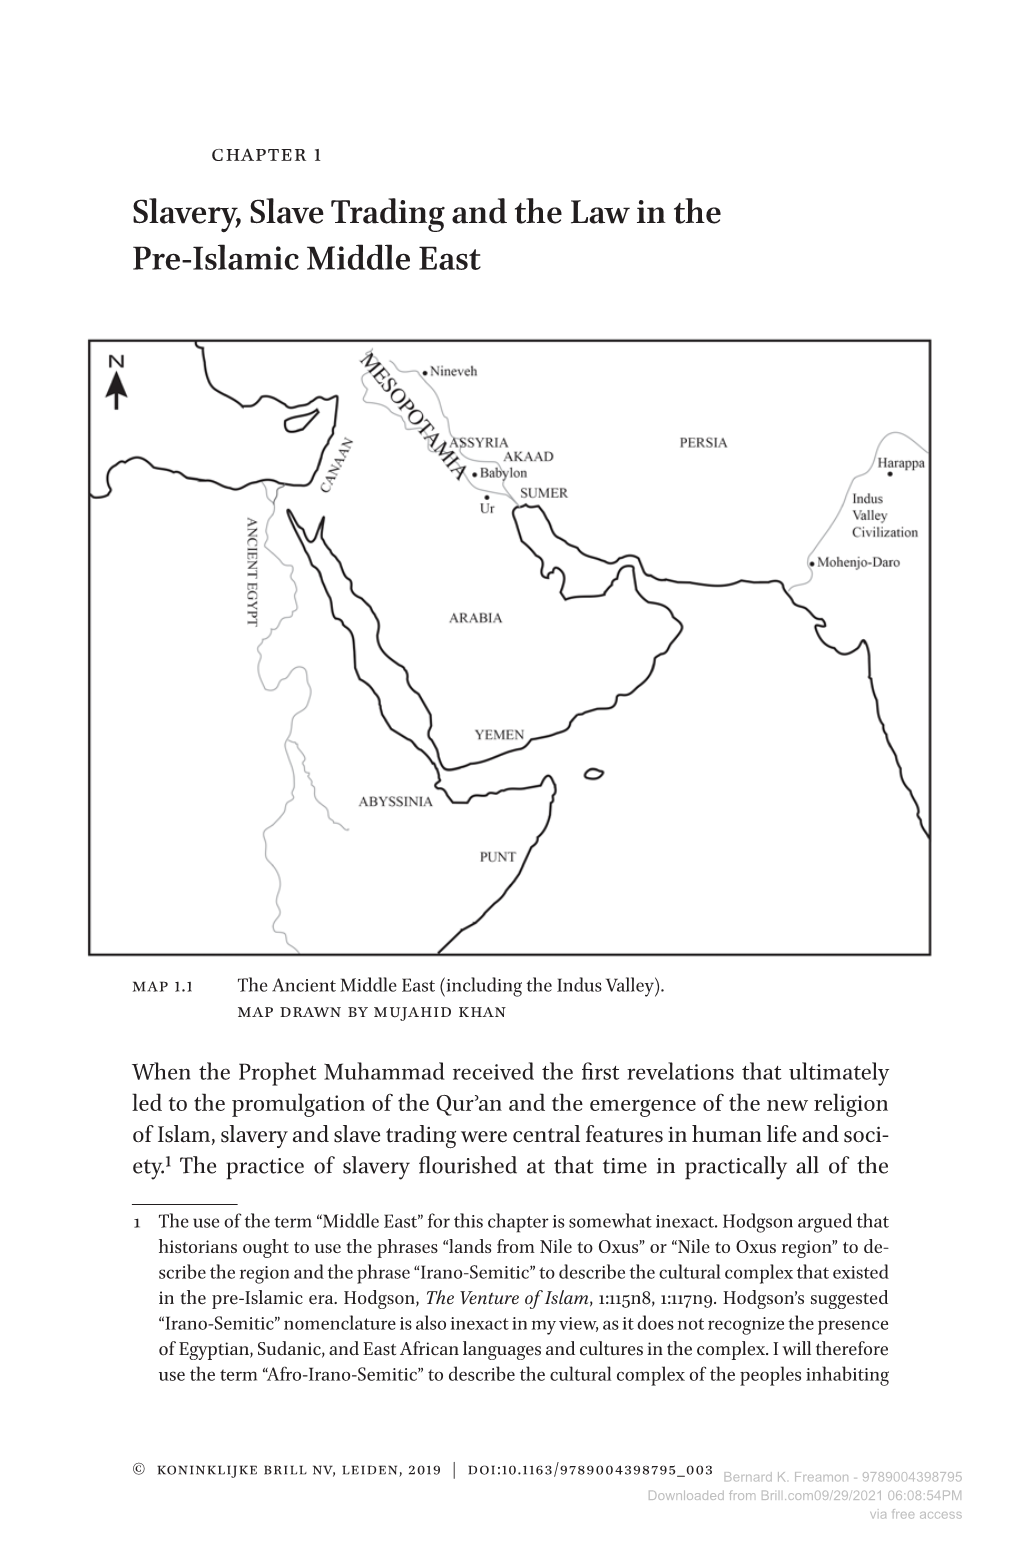 Slavery, Slave Trading and the Law in the Pre-Islamic Middle East